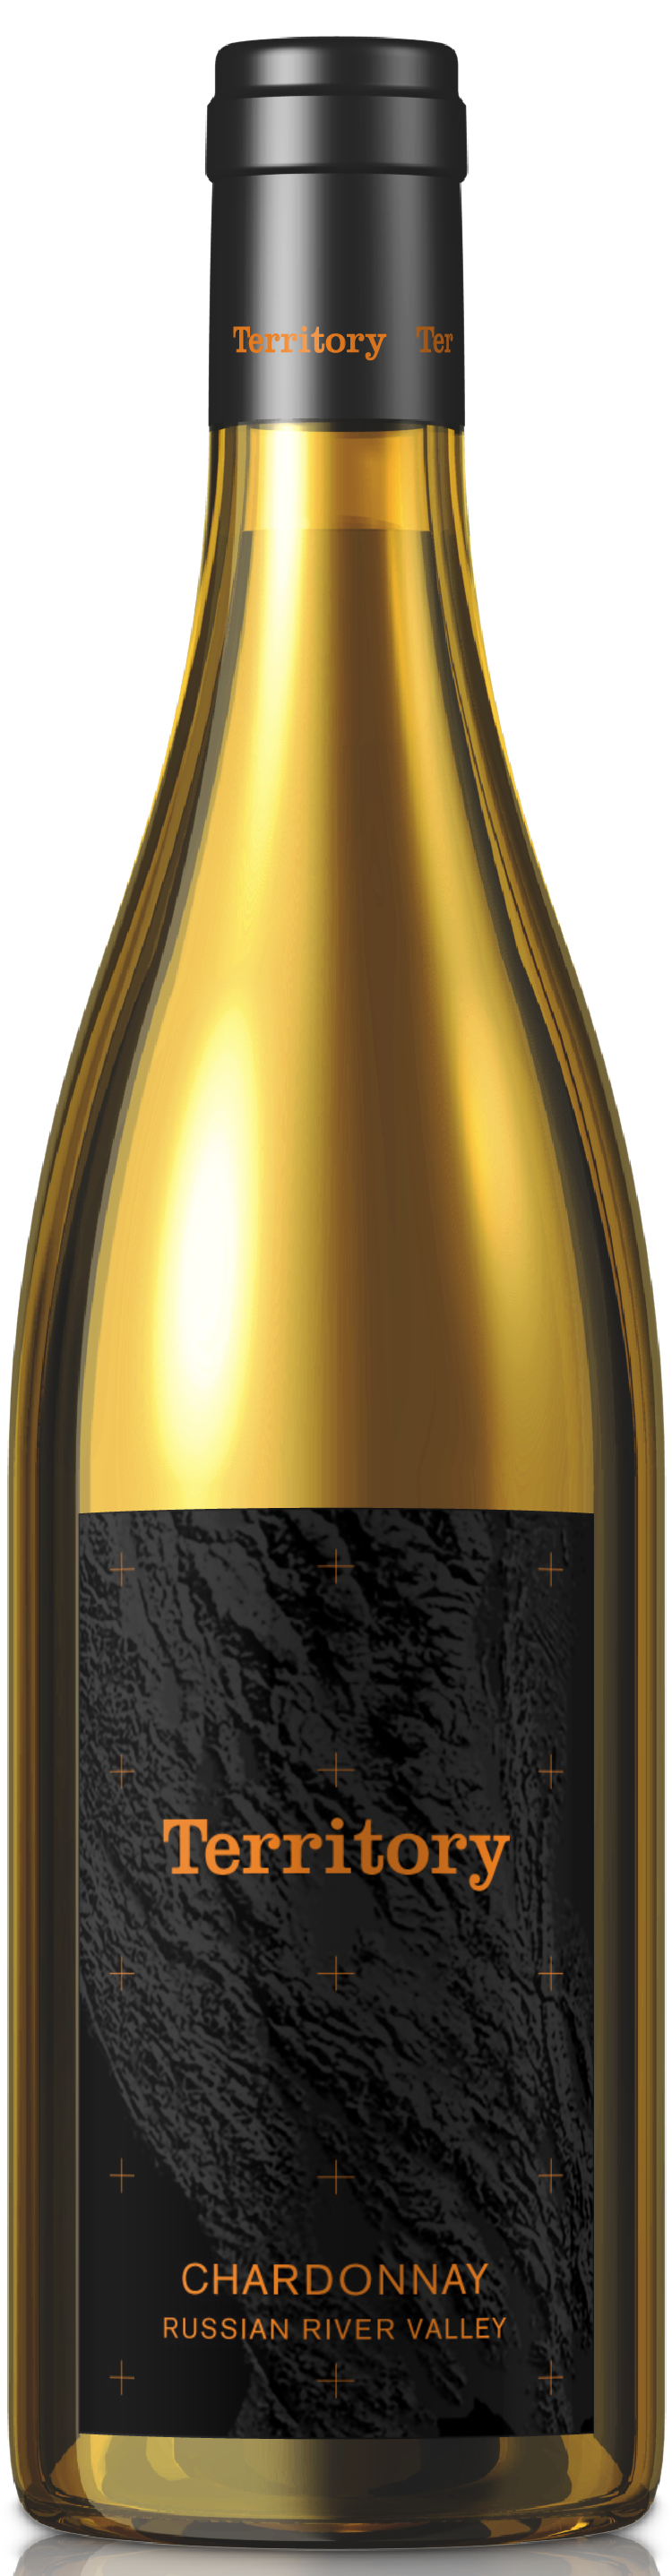 Product Image for 2017 Chardonnay